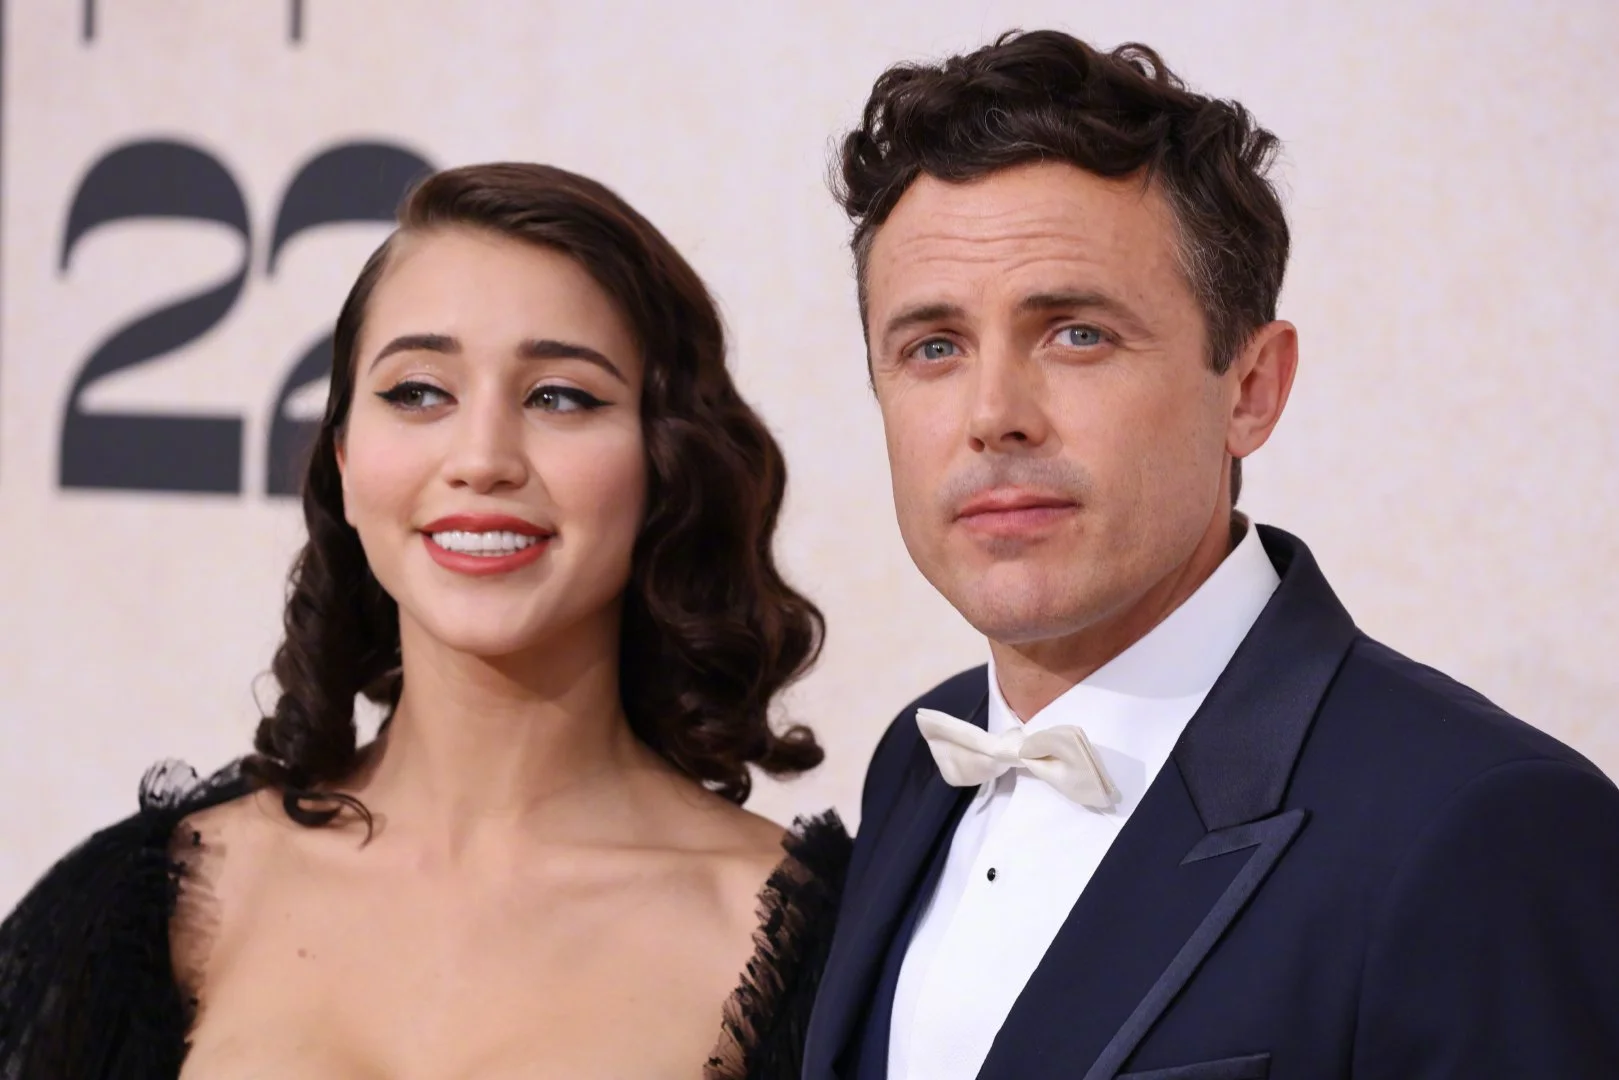 Casey Affleck and Caylee Cowan at the amfAR Charity Gala in Cannes